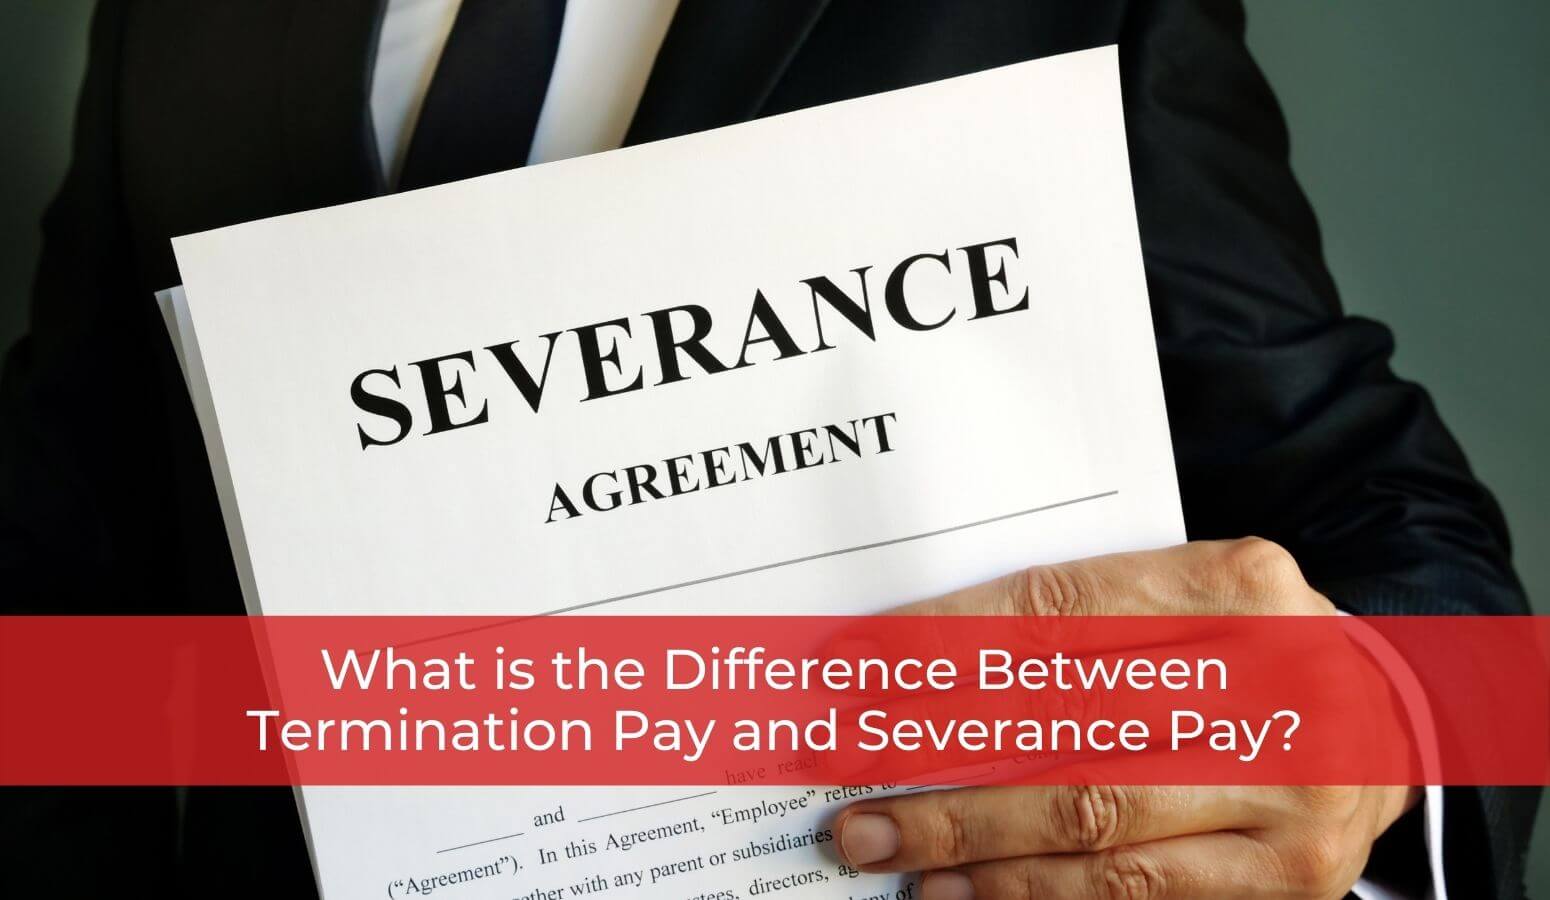 Featured image for “What is the Difference Between Termination Pay and Severance Pay?”